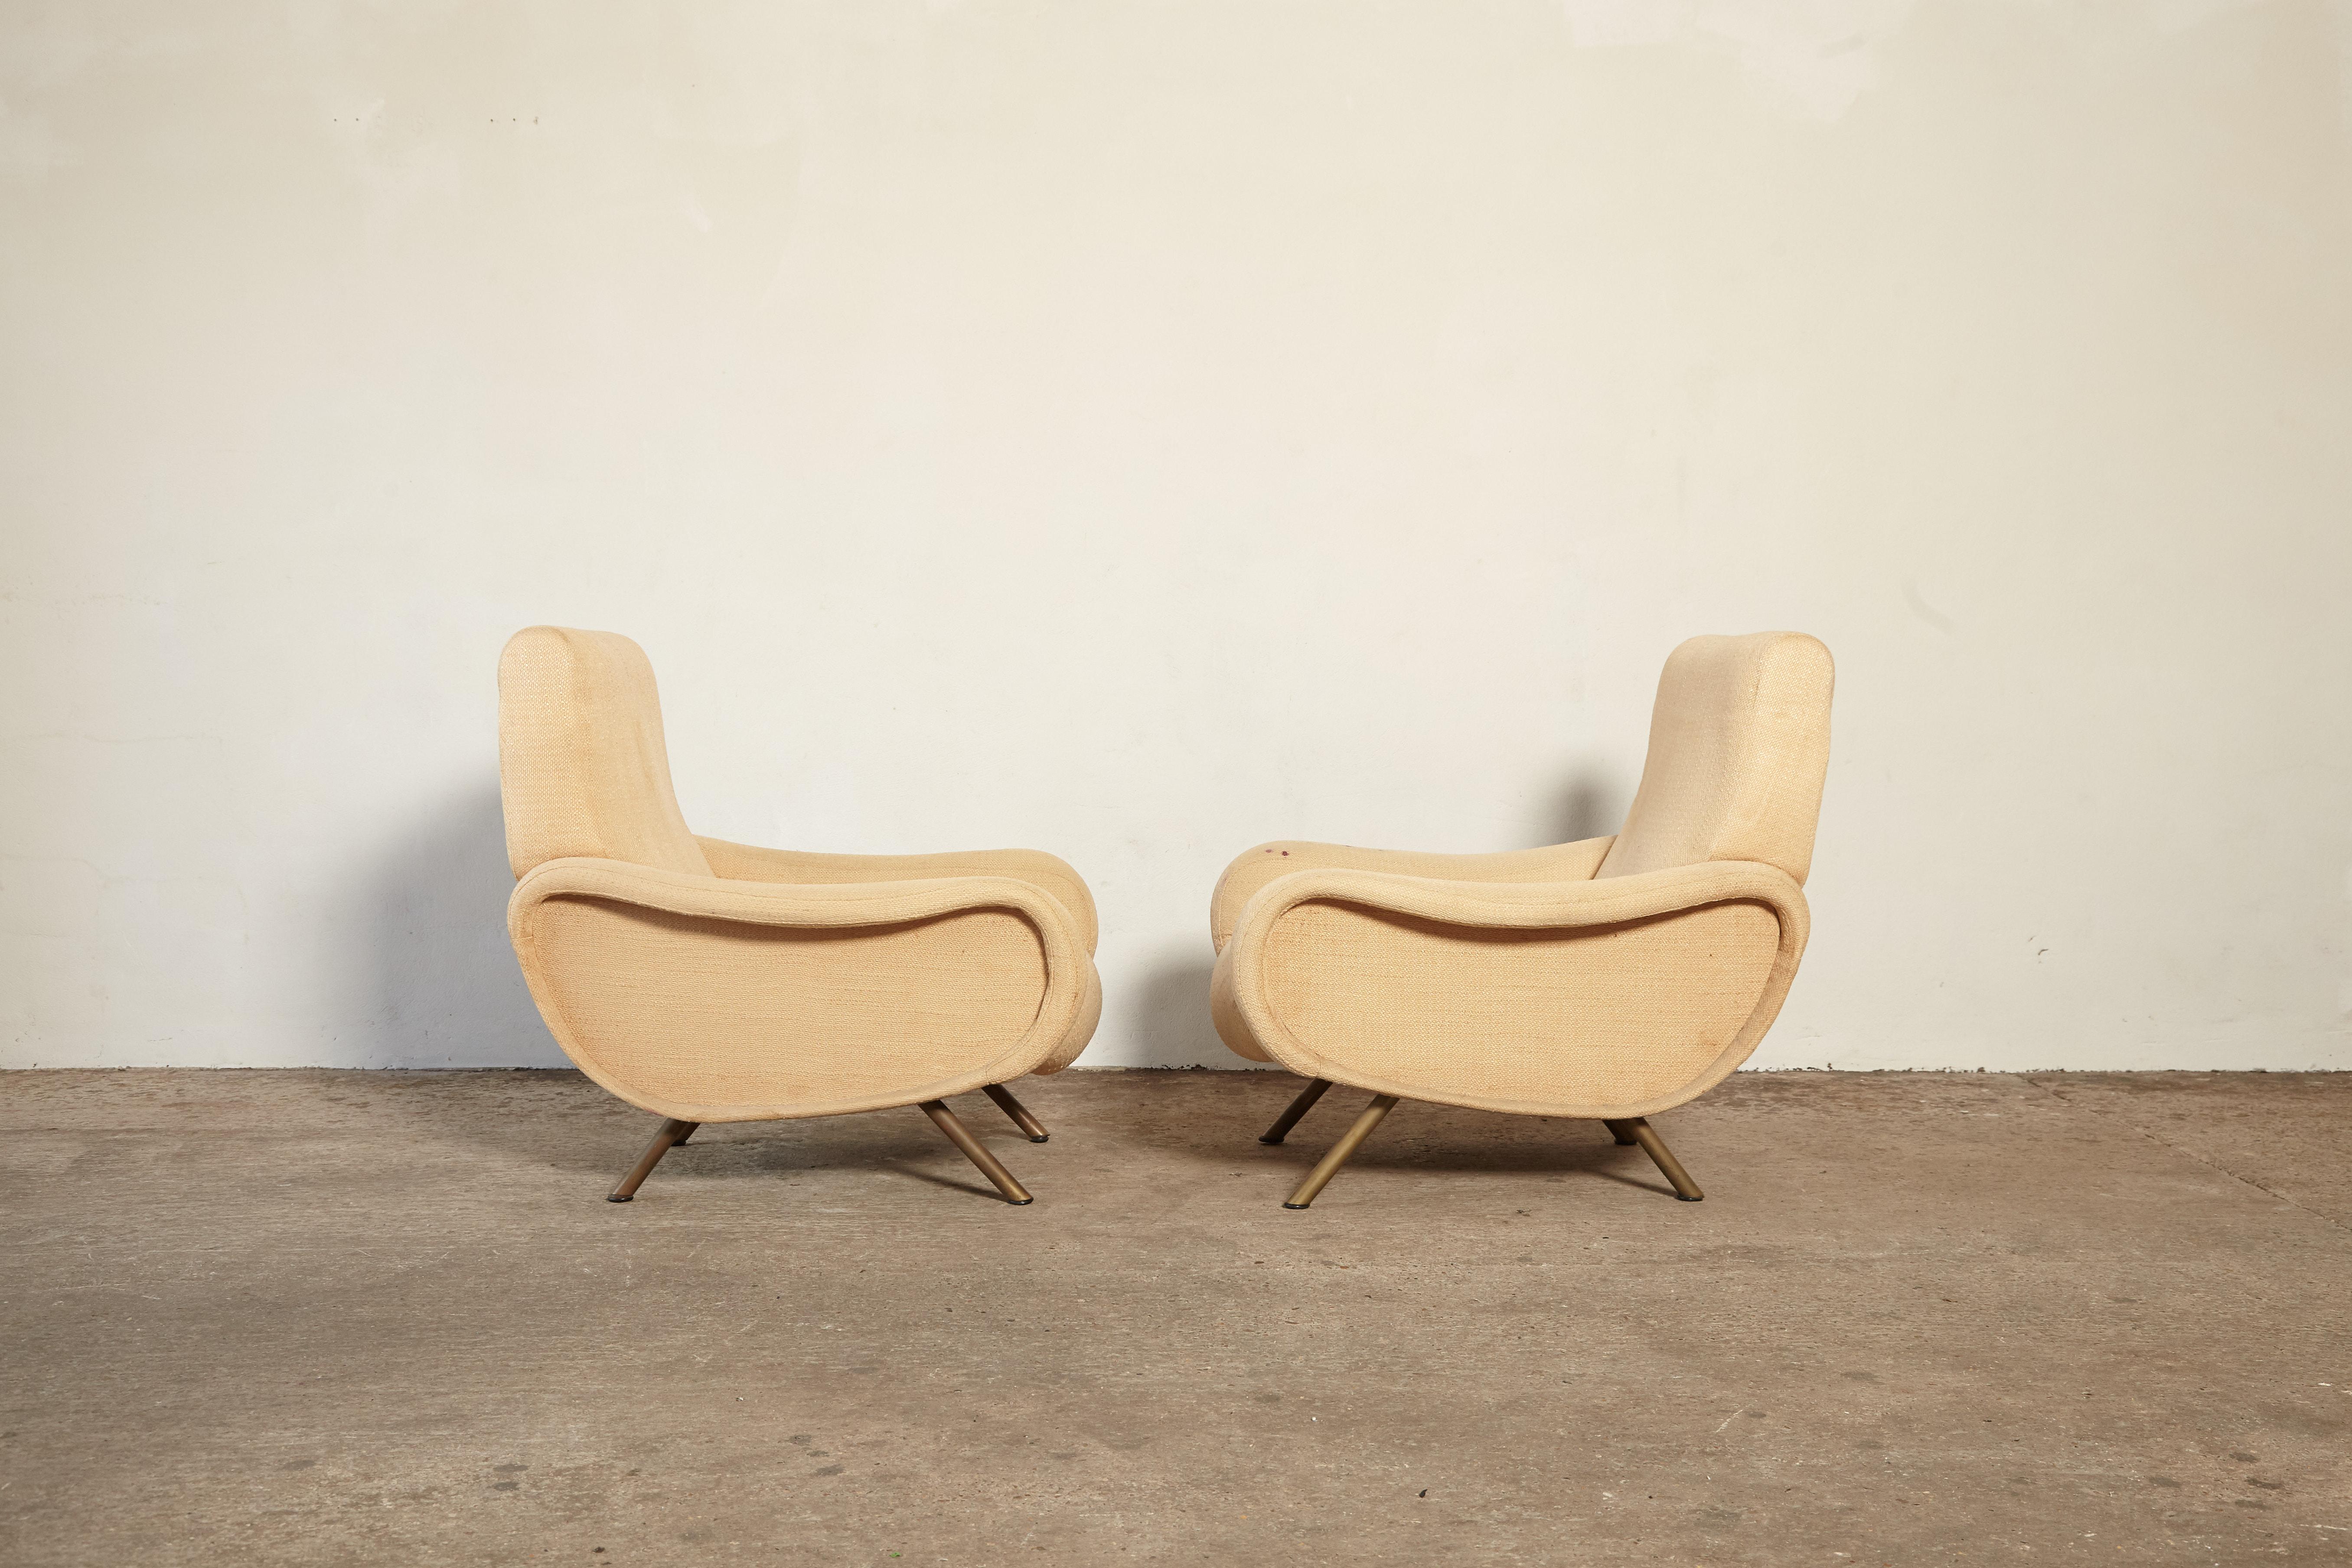 A pair of original and authentic Marco Zanuso Lady chairs, Arflex, France/Italy, 1960s. The upholstery is worn and stained so the chairs require re-upholstery so the price here includes re-upholstery in customer supplied material.